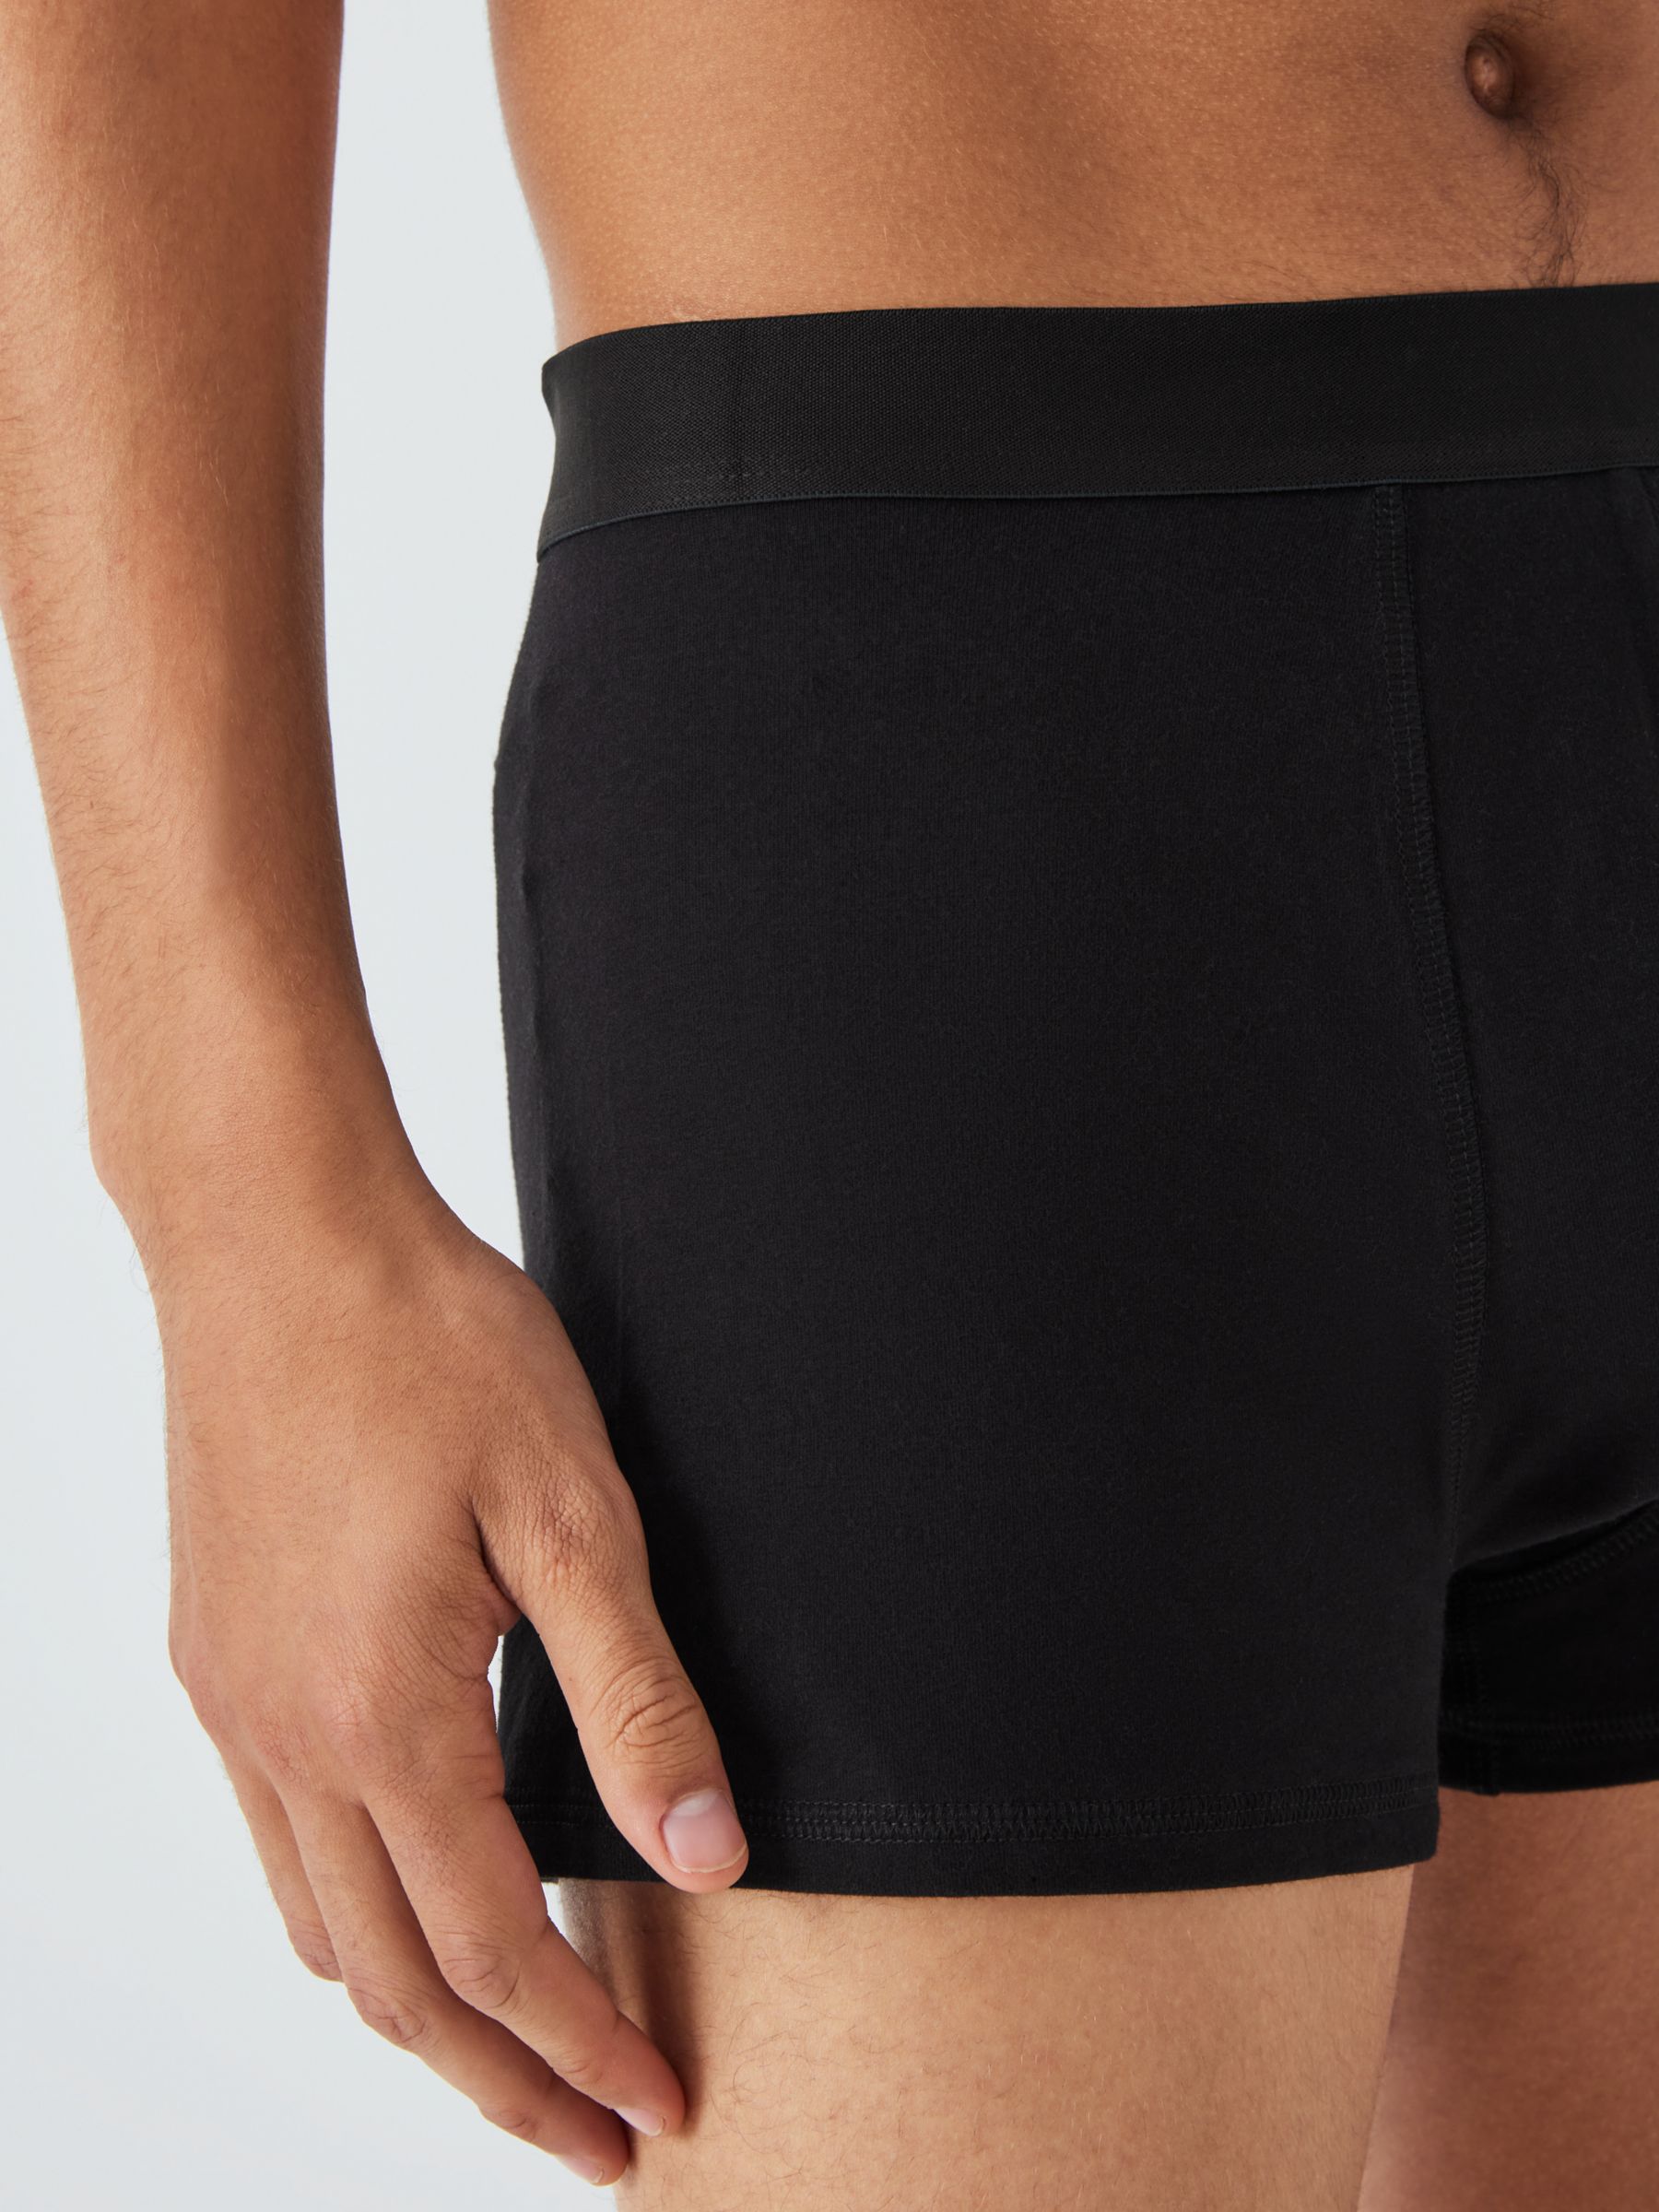 Buy John Lewis ANYDAY Stretch Cotton Trunks, Pack of 5, Black/Grey Online at johnlewis.com